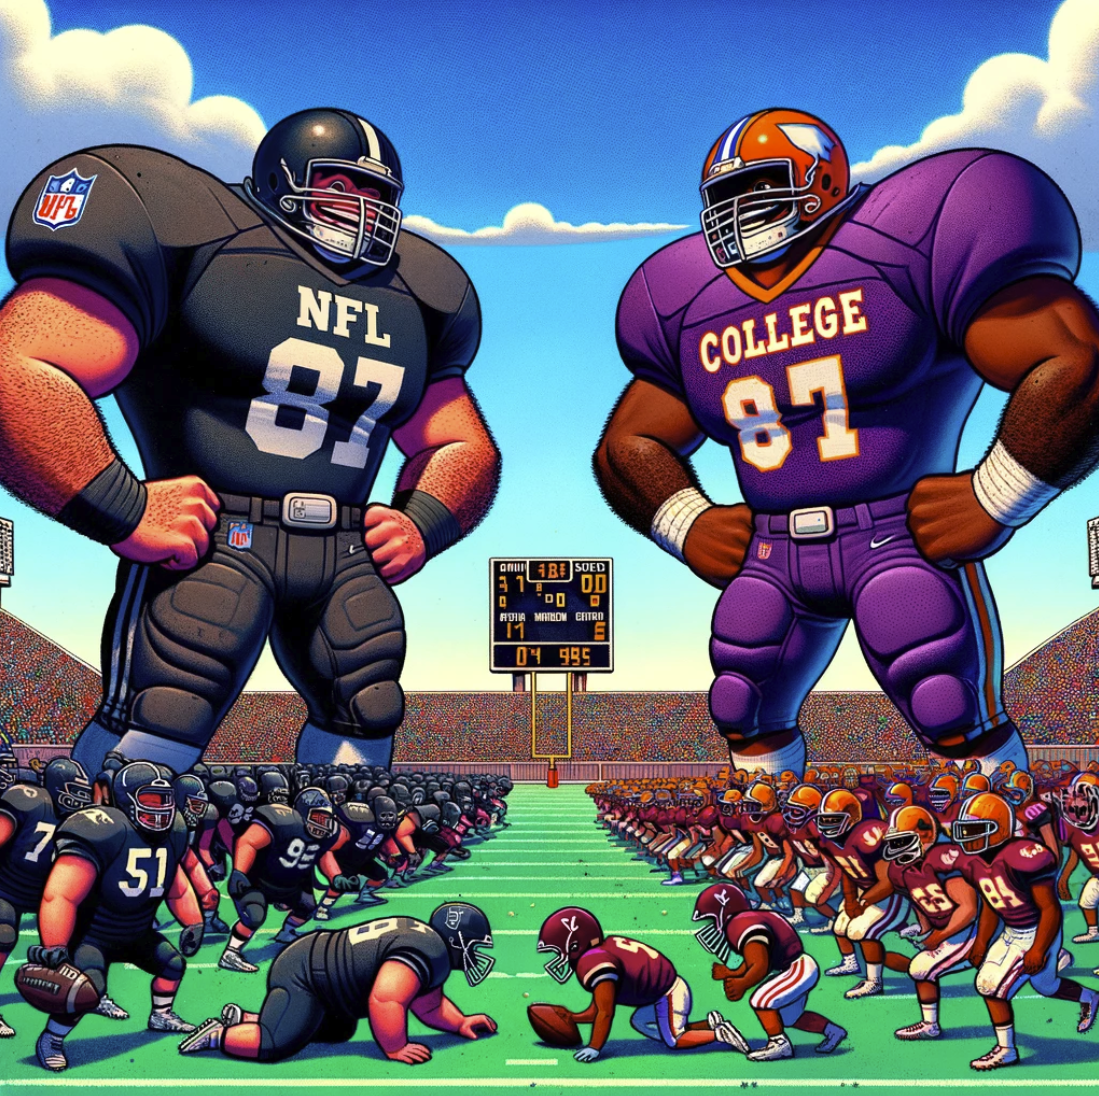 mismatched football game between an NFL team and a college football team. The scene captures the size and skill disparity in a fun, exaggerated manner.